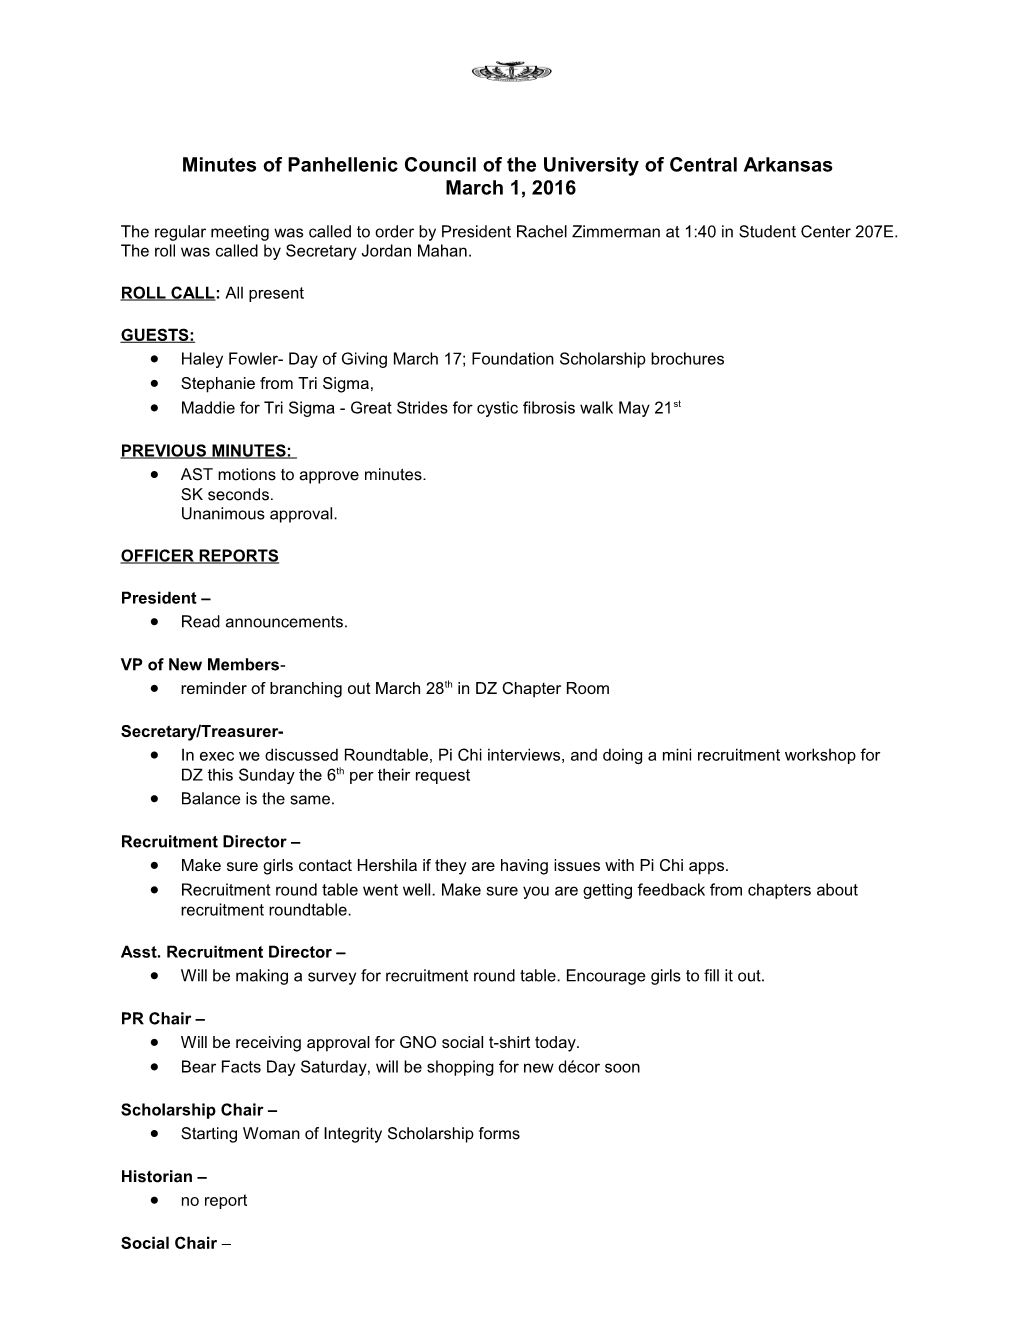 Panhellenic Council Minutes Template s1